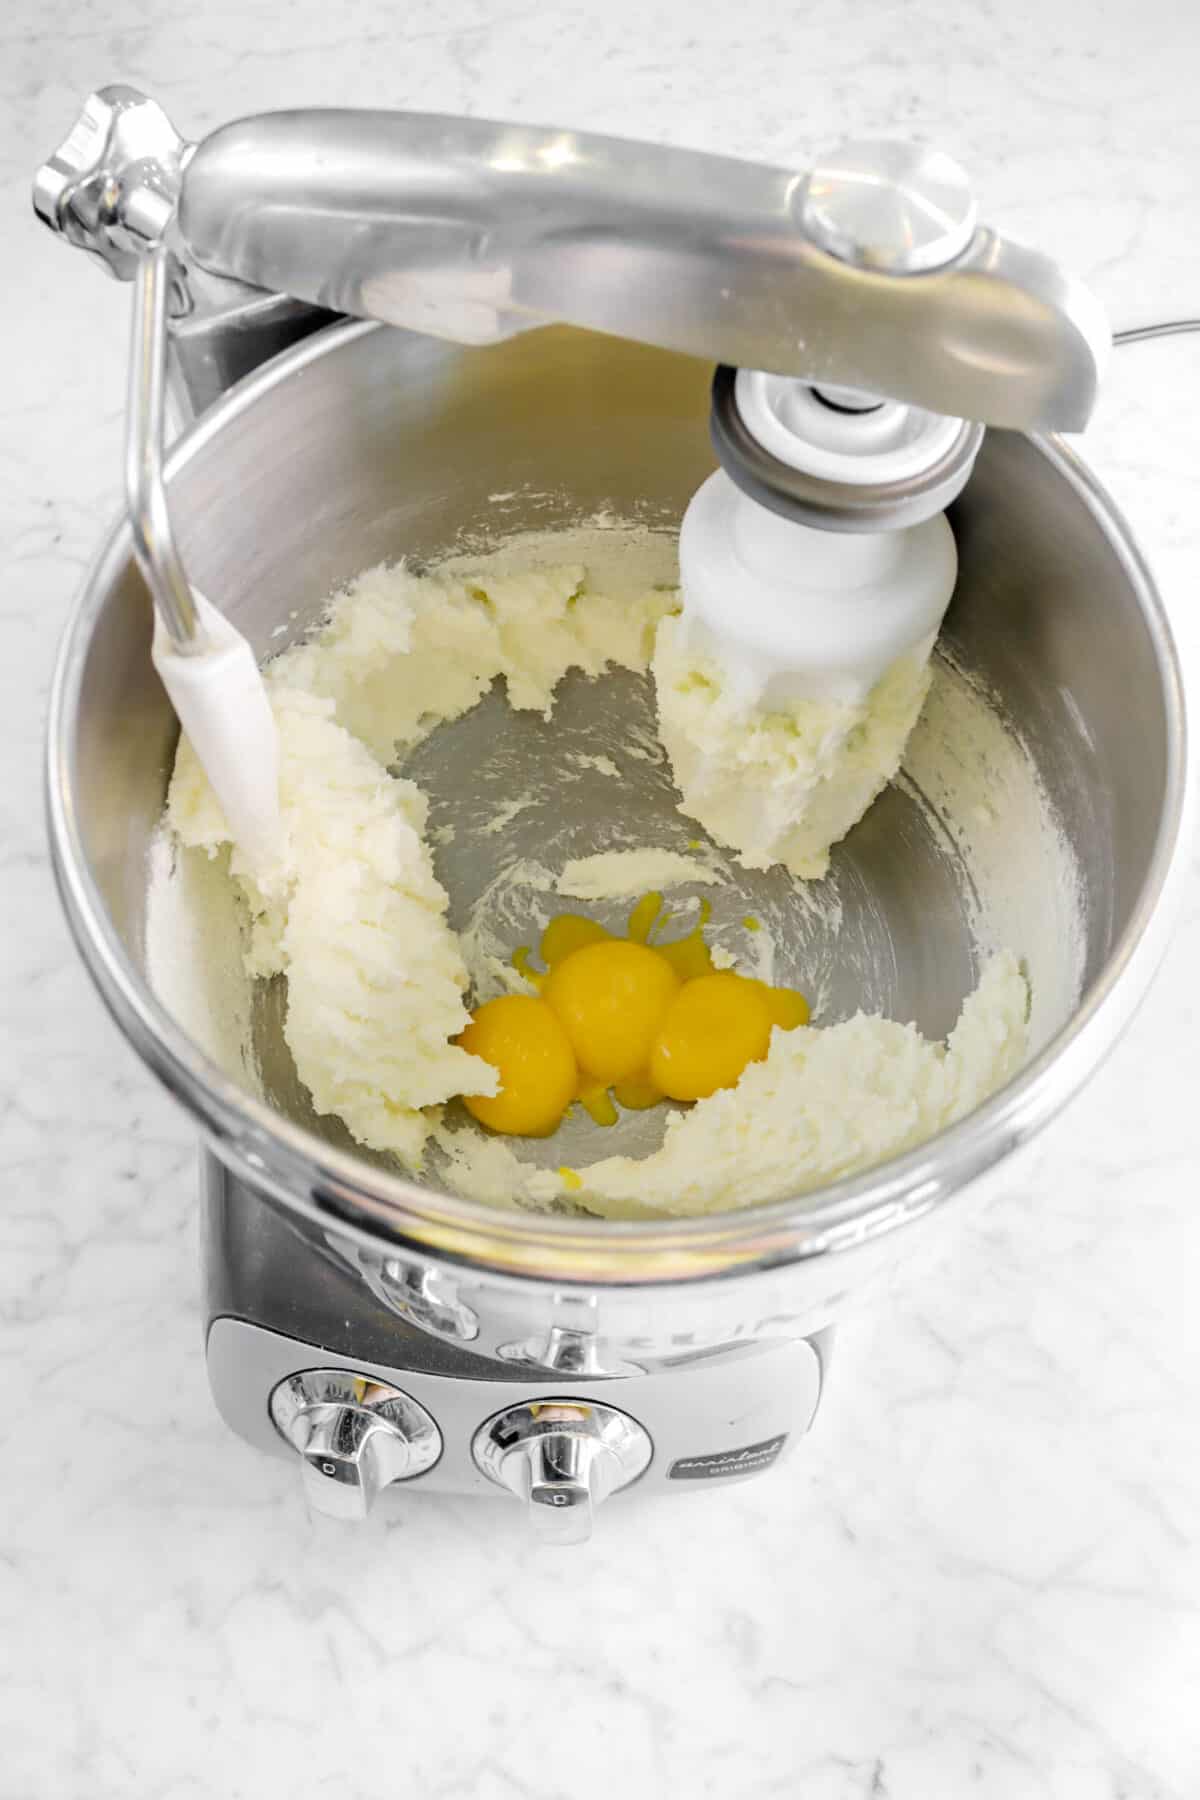 three egg yolks added to butter mixture